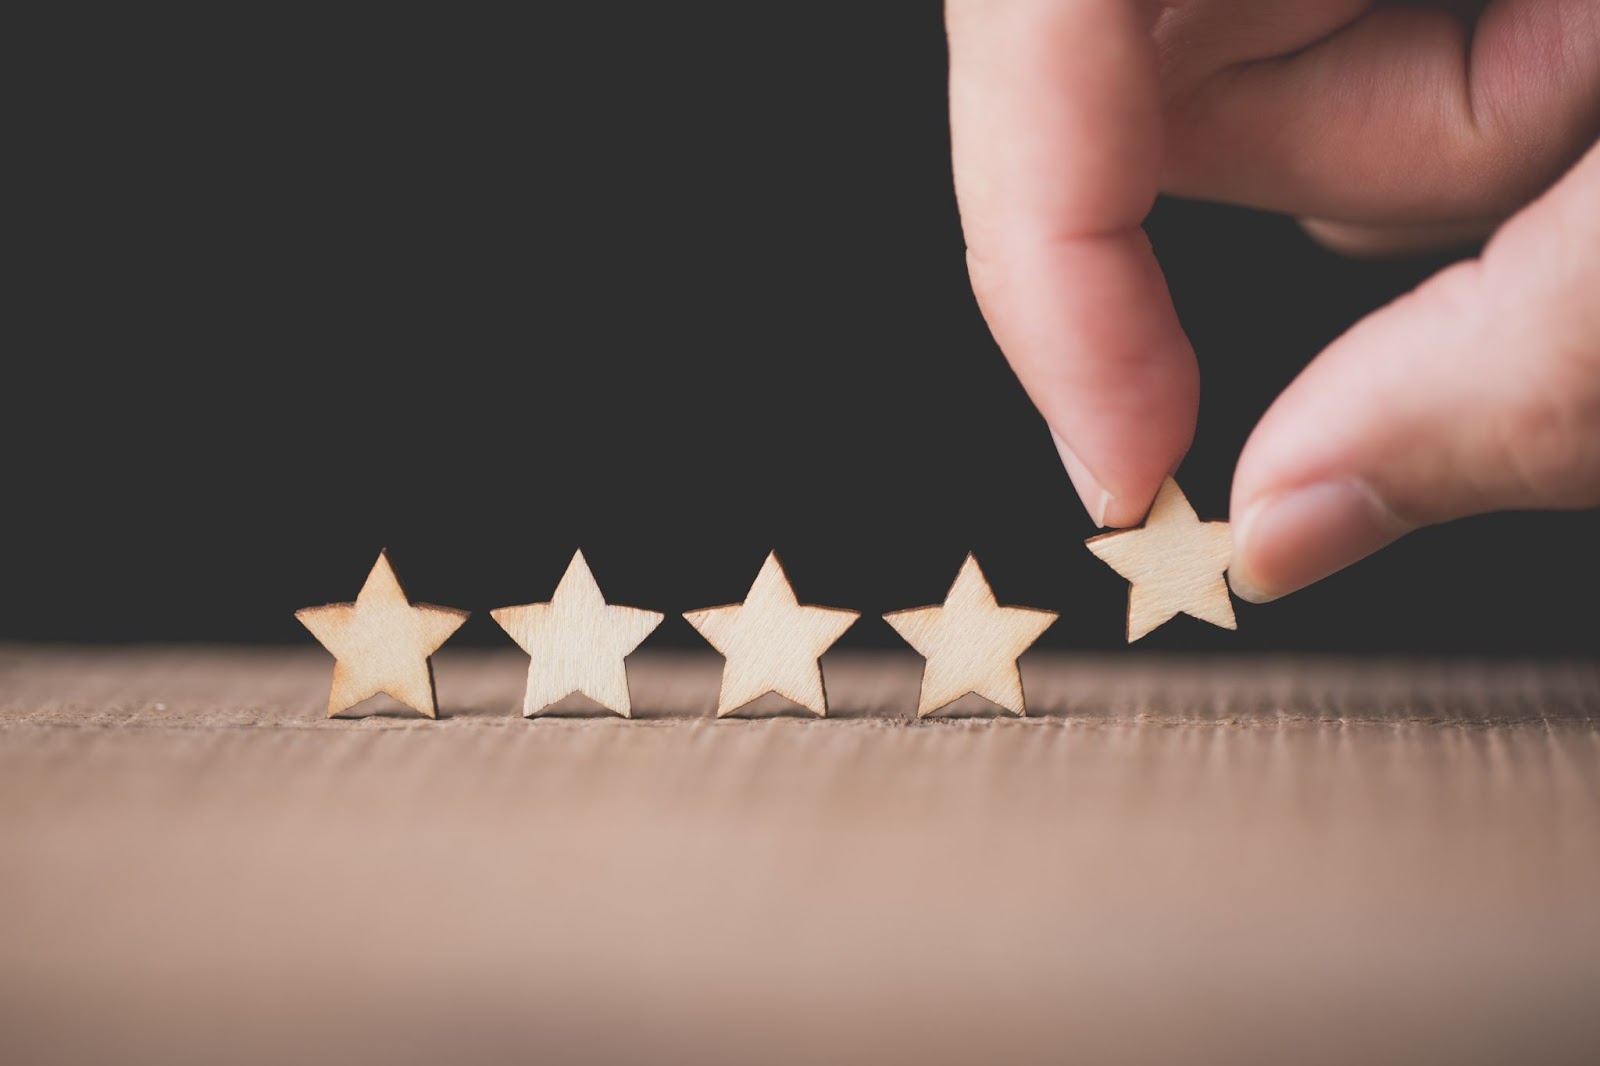 A hand carefully placing down a row of small wooden stars, which look similar to an online review score